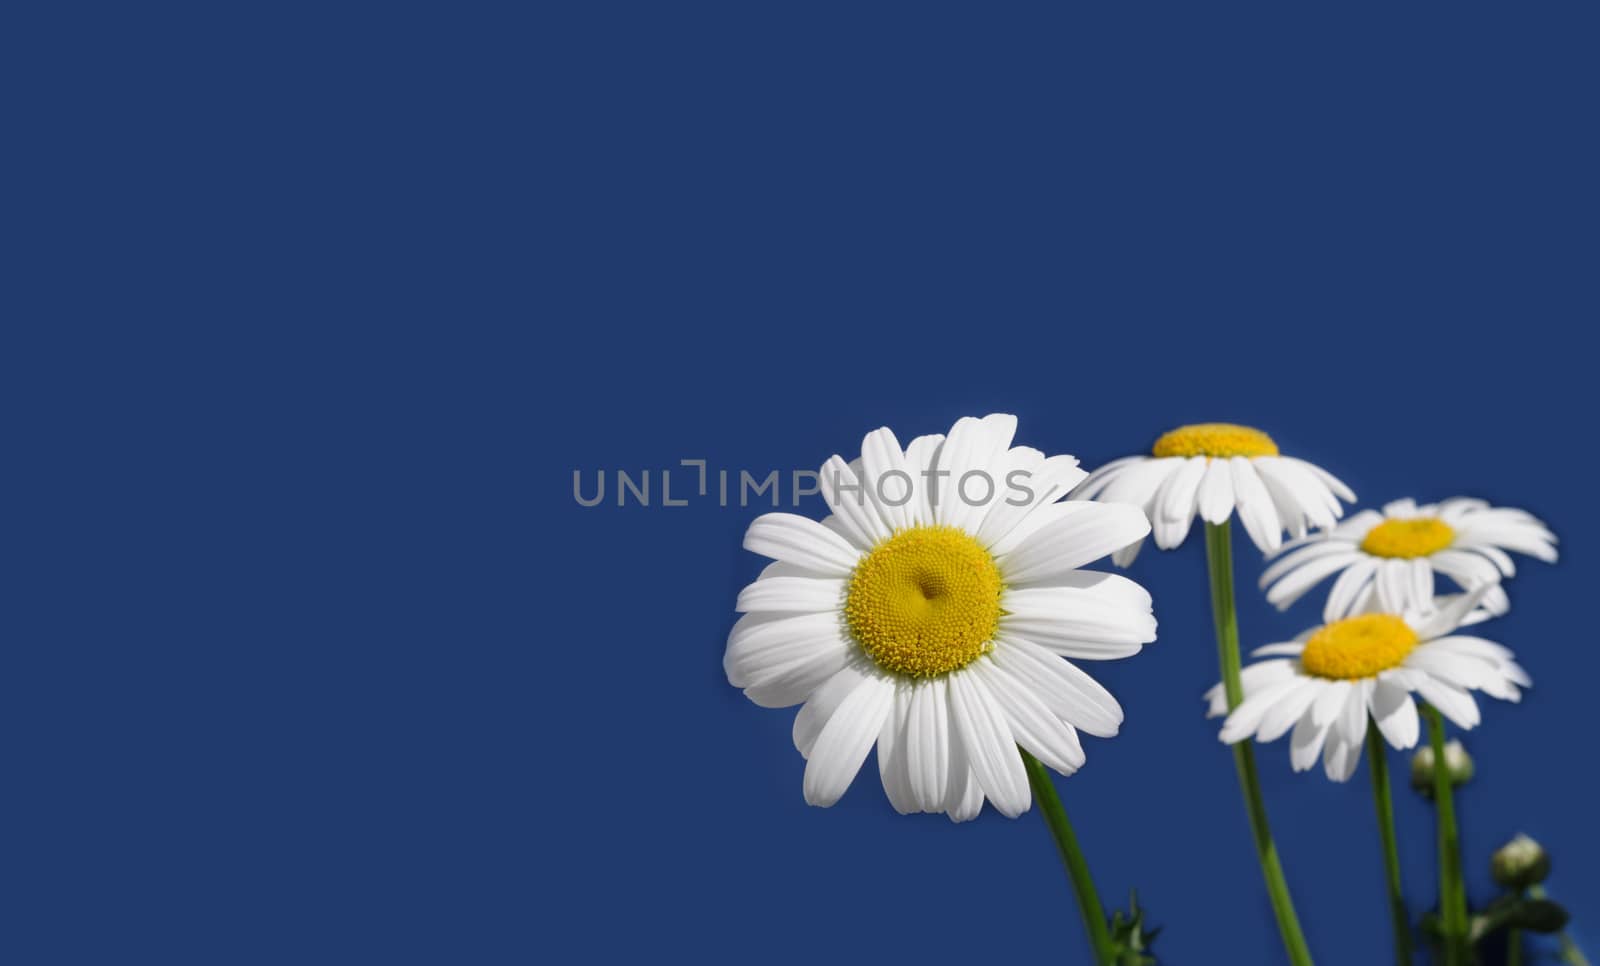 Wild chamomile flowers isolated on blue background at right and free space for text at left by dymaxfoto